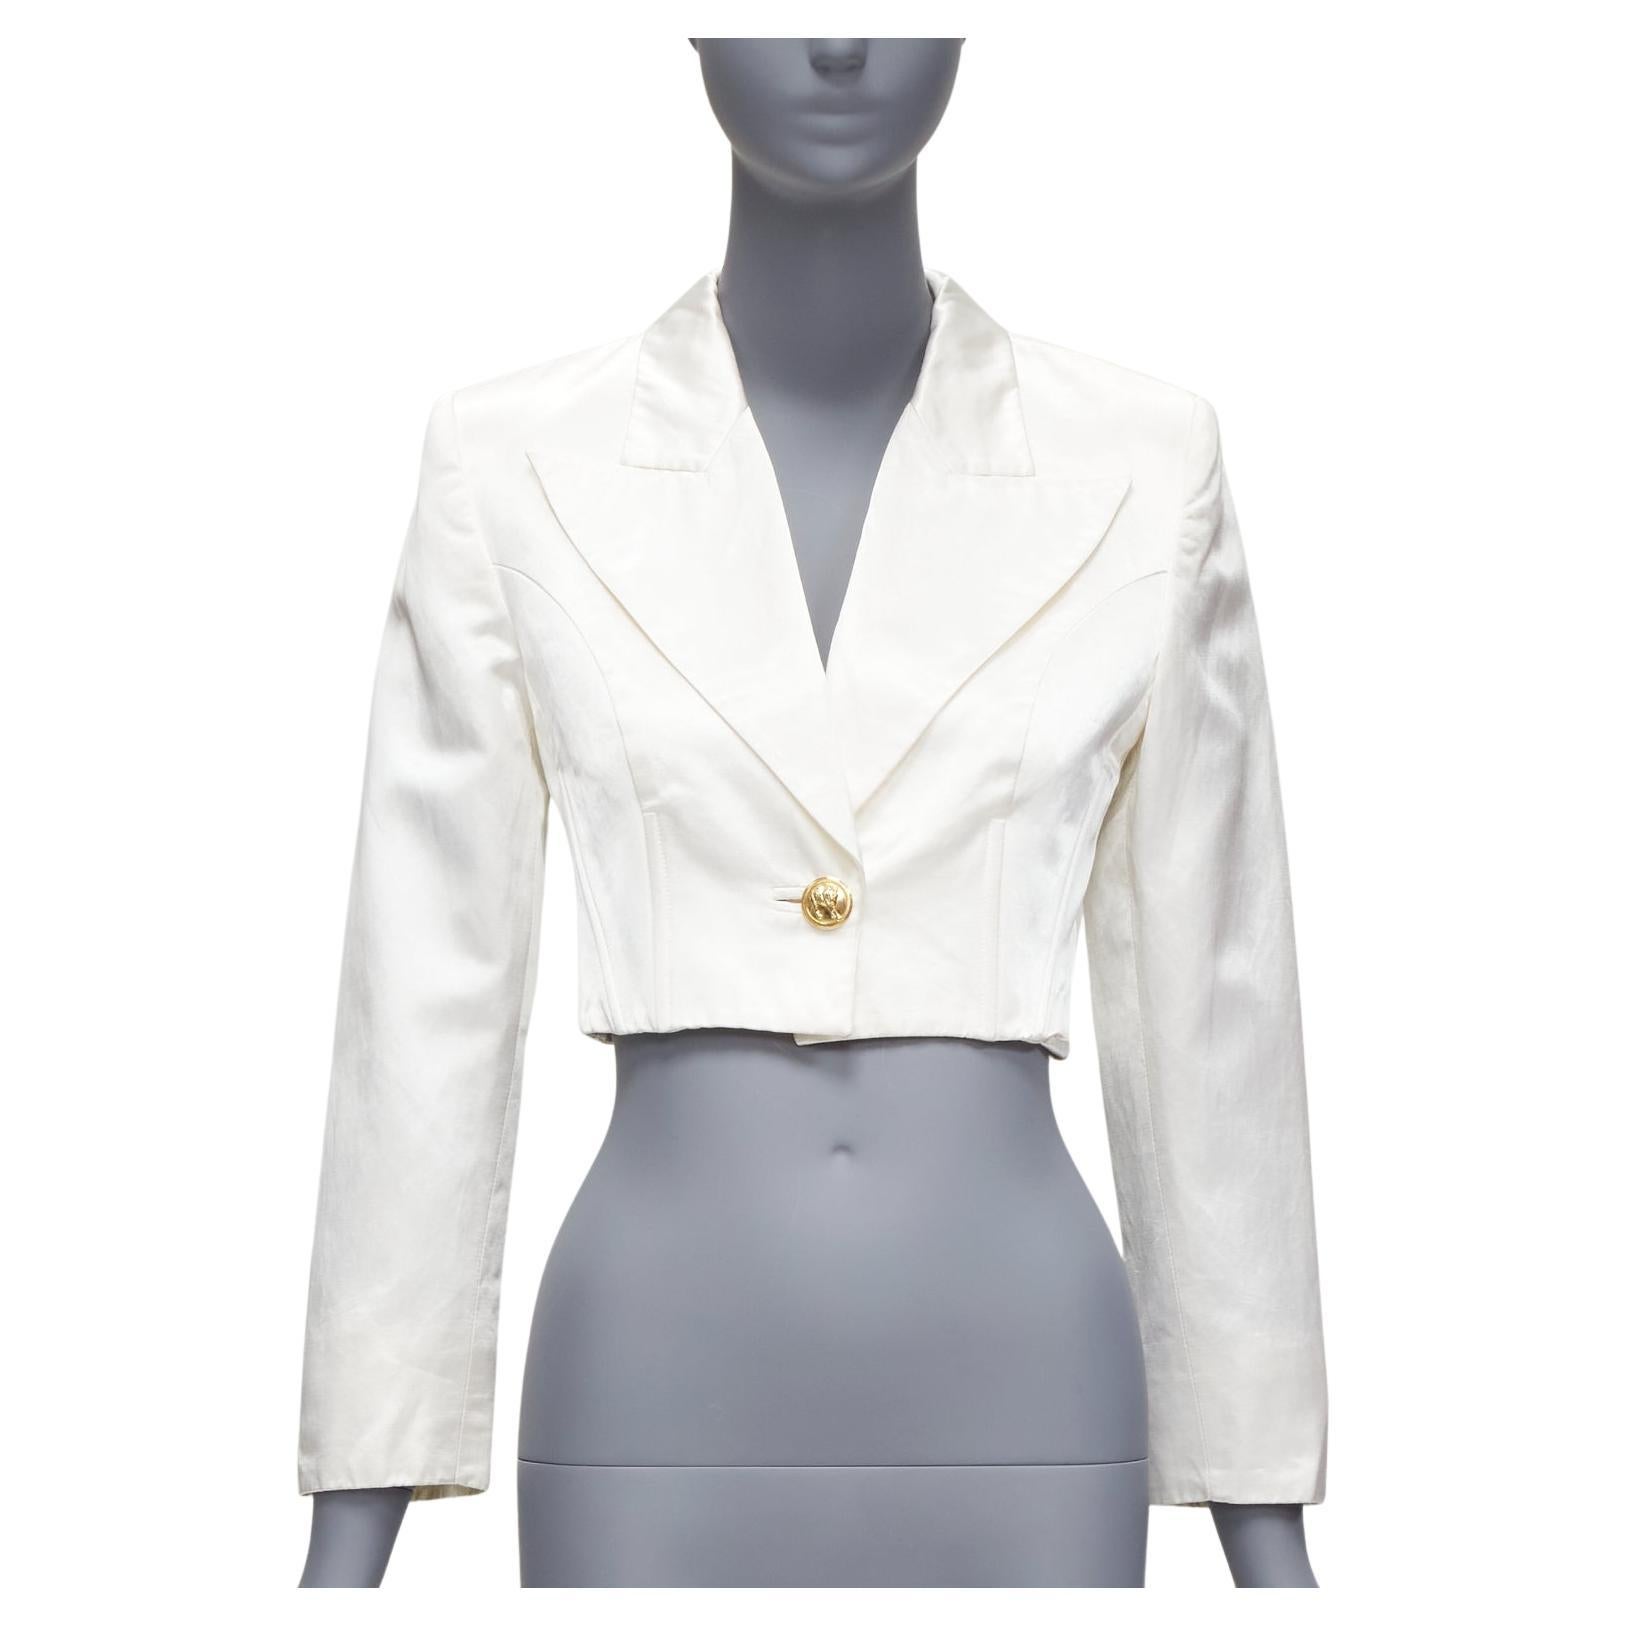 VERSUS GIANNI VERSACE pearl satin lattice lace back cropped blazer jacket IT42 M
Reference: TGAS/D00388
Brand: Versus
Designer: Gianni Versace
Material: Cotton, Blend
Color: Pearl
Pattern: Solid
Closure: Button
Lining: White Fabric
Extra Details: